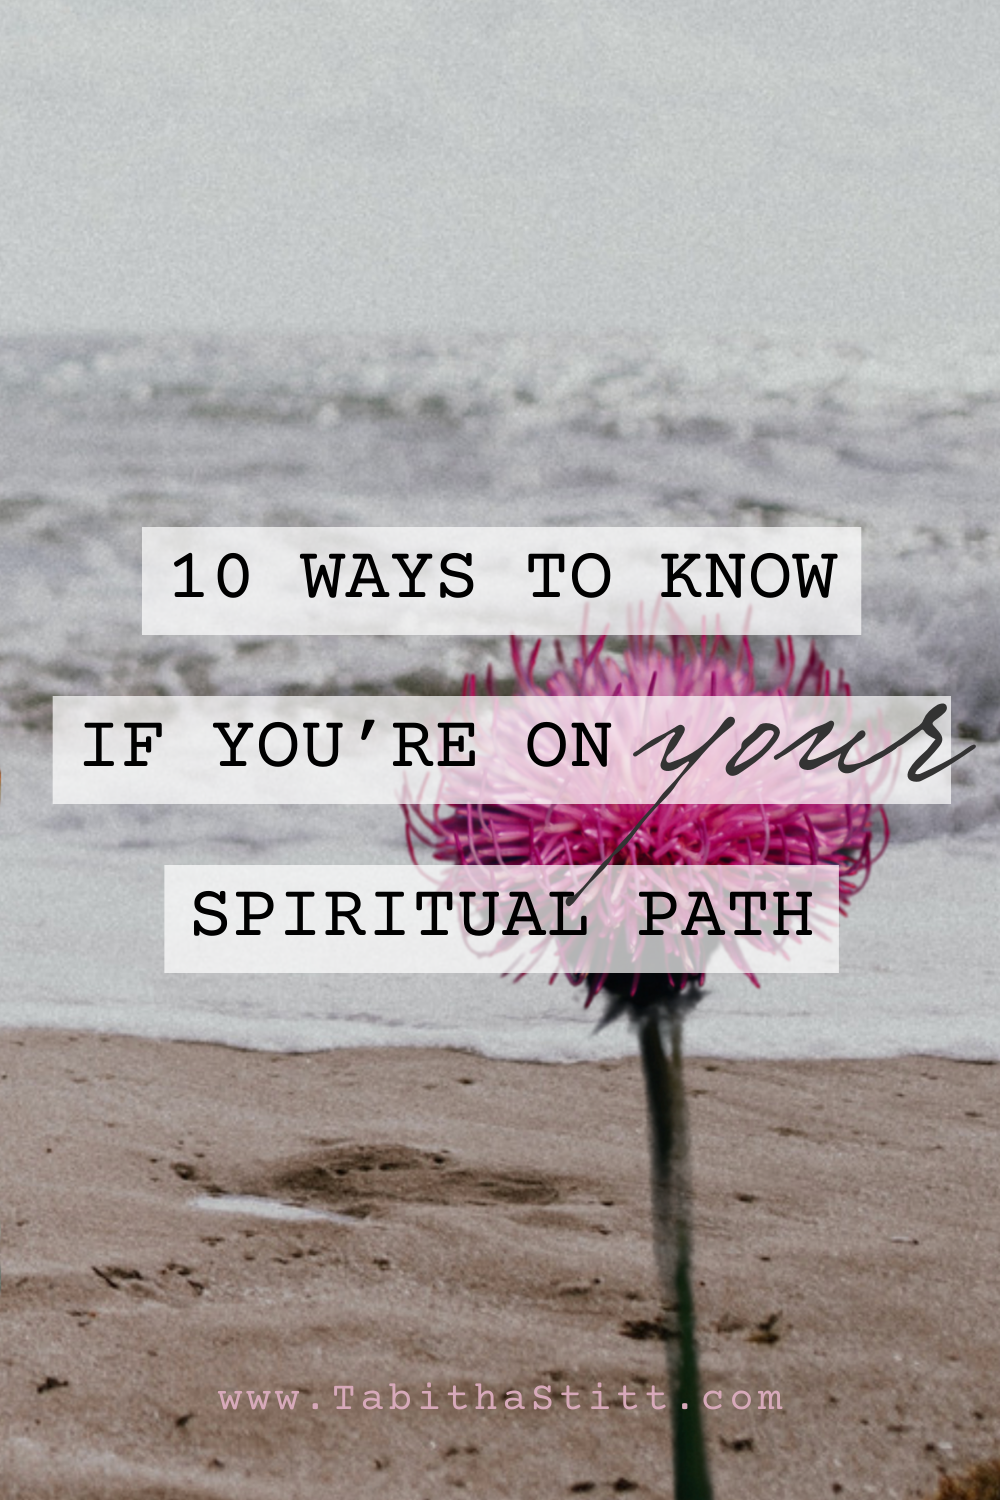 10 Ways to Know If You're on Your Spiritual Path with pink flower symbolizing faith and trust on your path forward